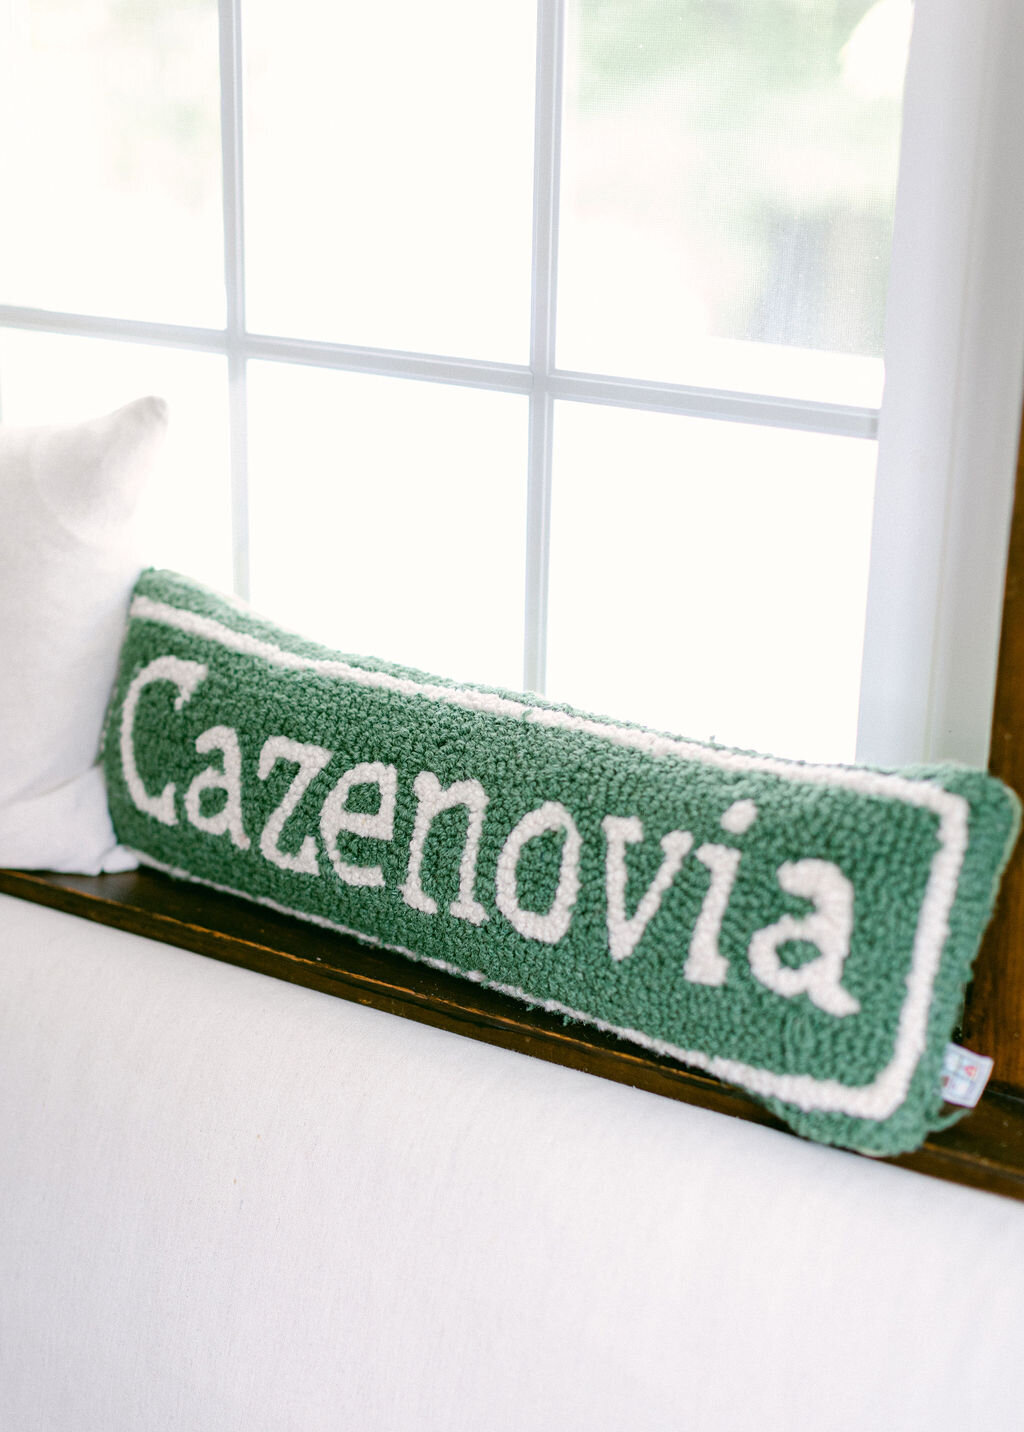 hunter green hand punched pillow with white letters spelling "Cazenovia"